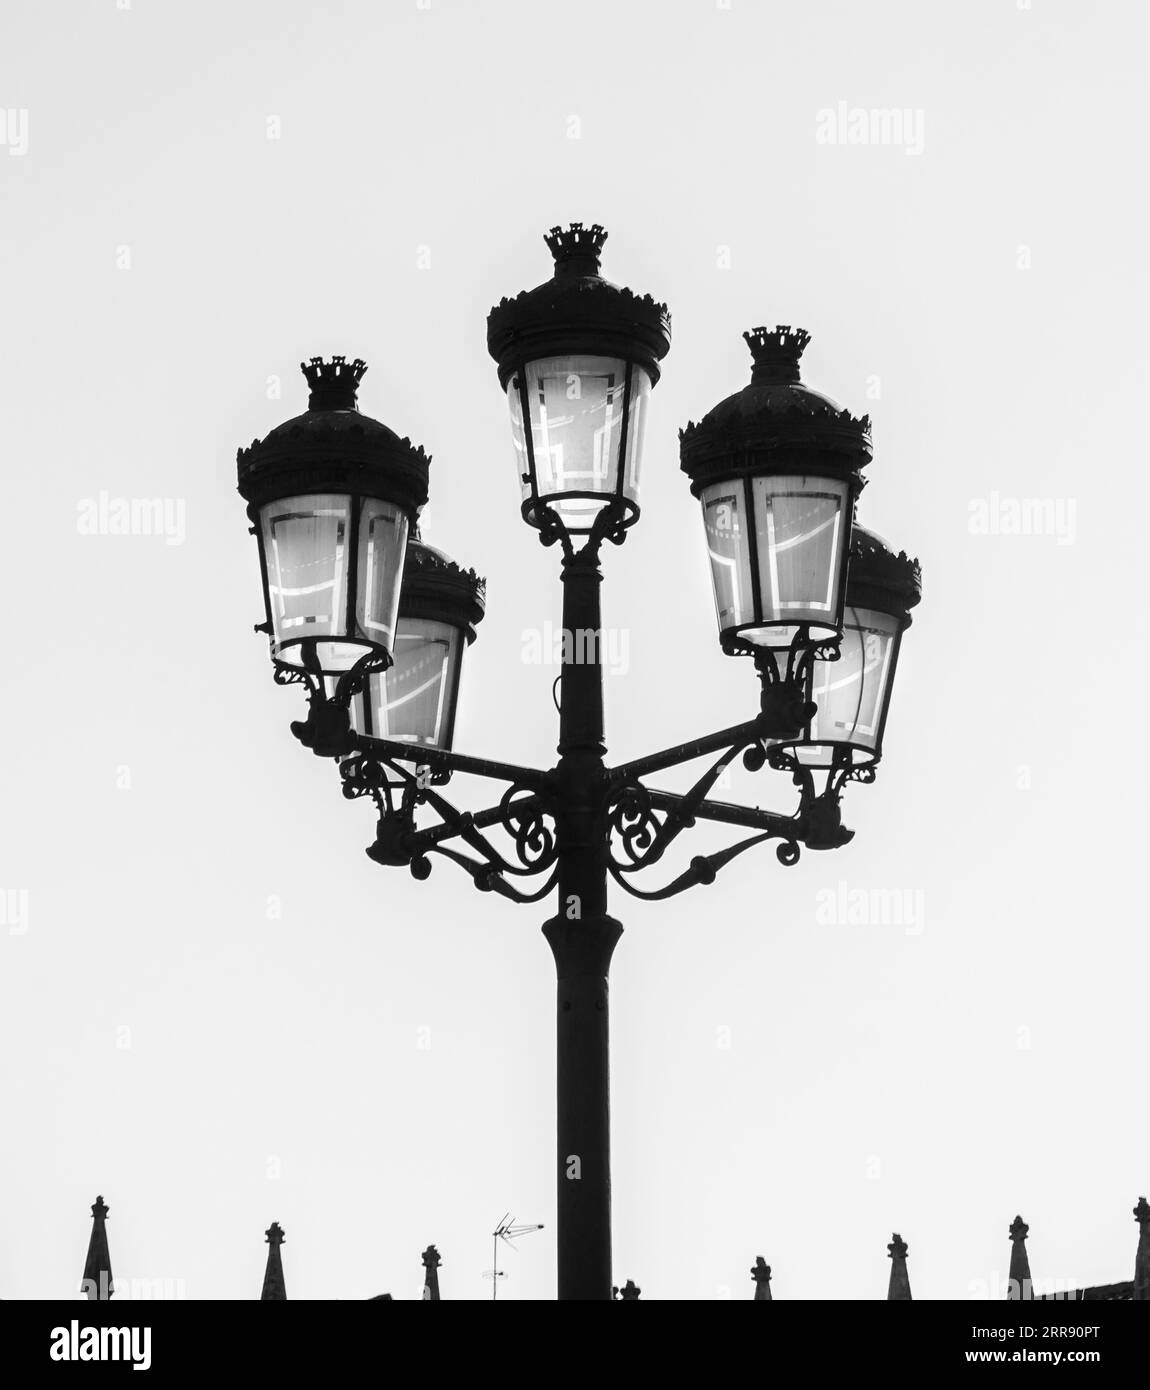 Silhouette of a wrought iron street lamp with five lanterns hand-decorated with opaque glass and a silhouette of a TV antenna and the peaks of the pal Stock Photo